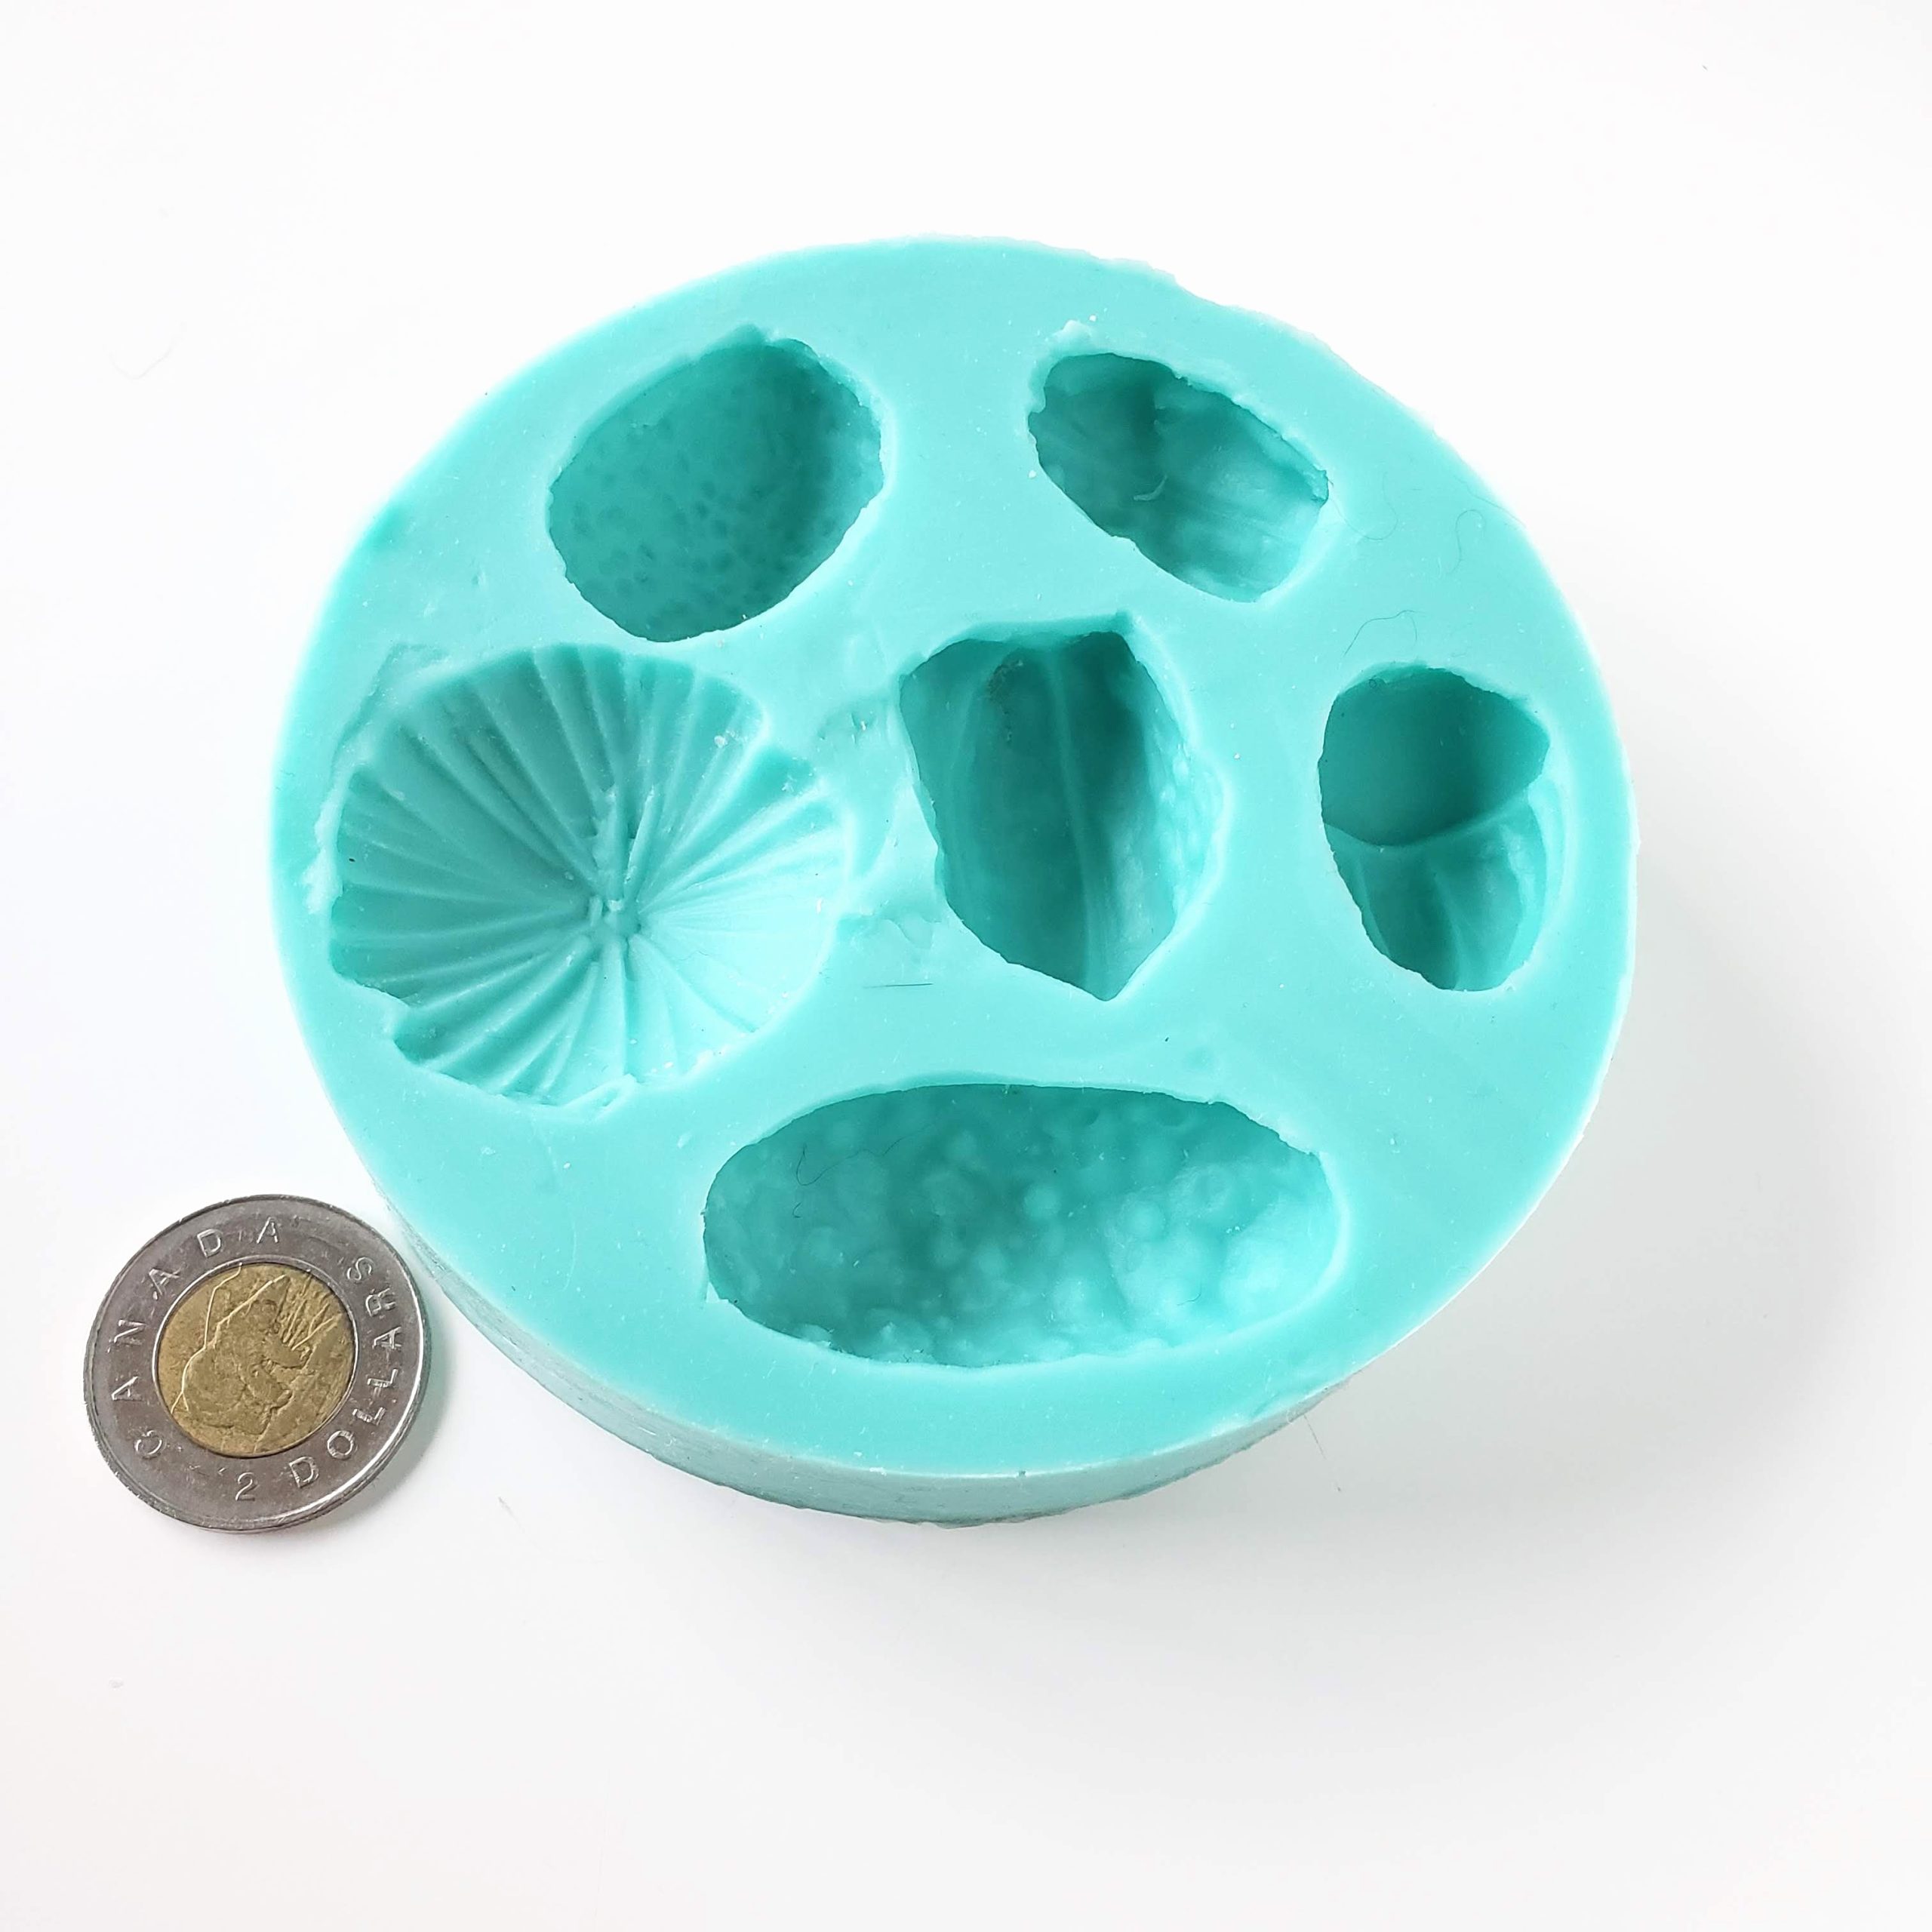 Flexible silicone bead molds for clay jewelry makers. Several designs in each mold. Can be used with resin.